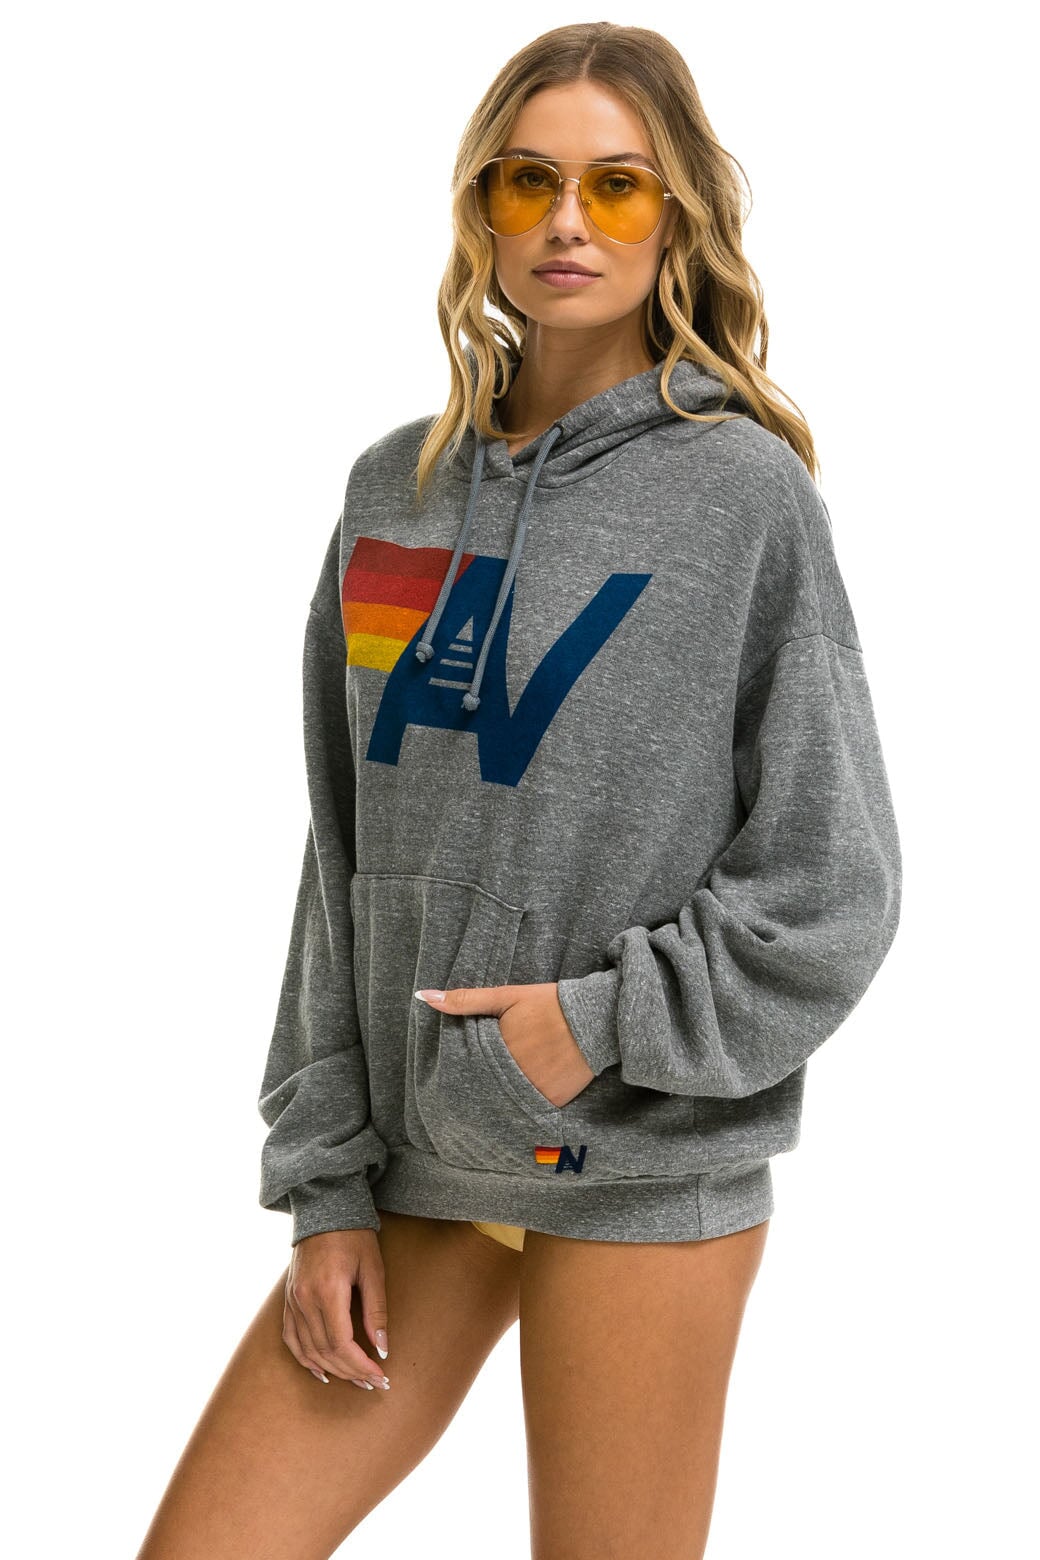 LOGO PULLOVER RELAXED HOODIE - HEATHER GREY Hoodie Aviator Nation 